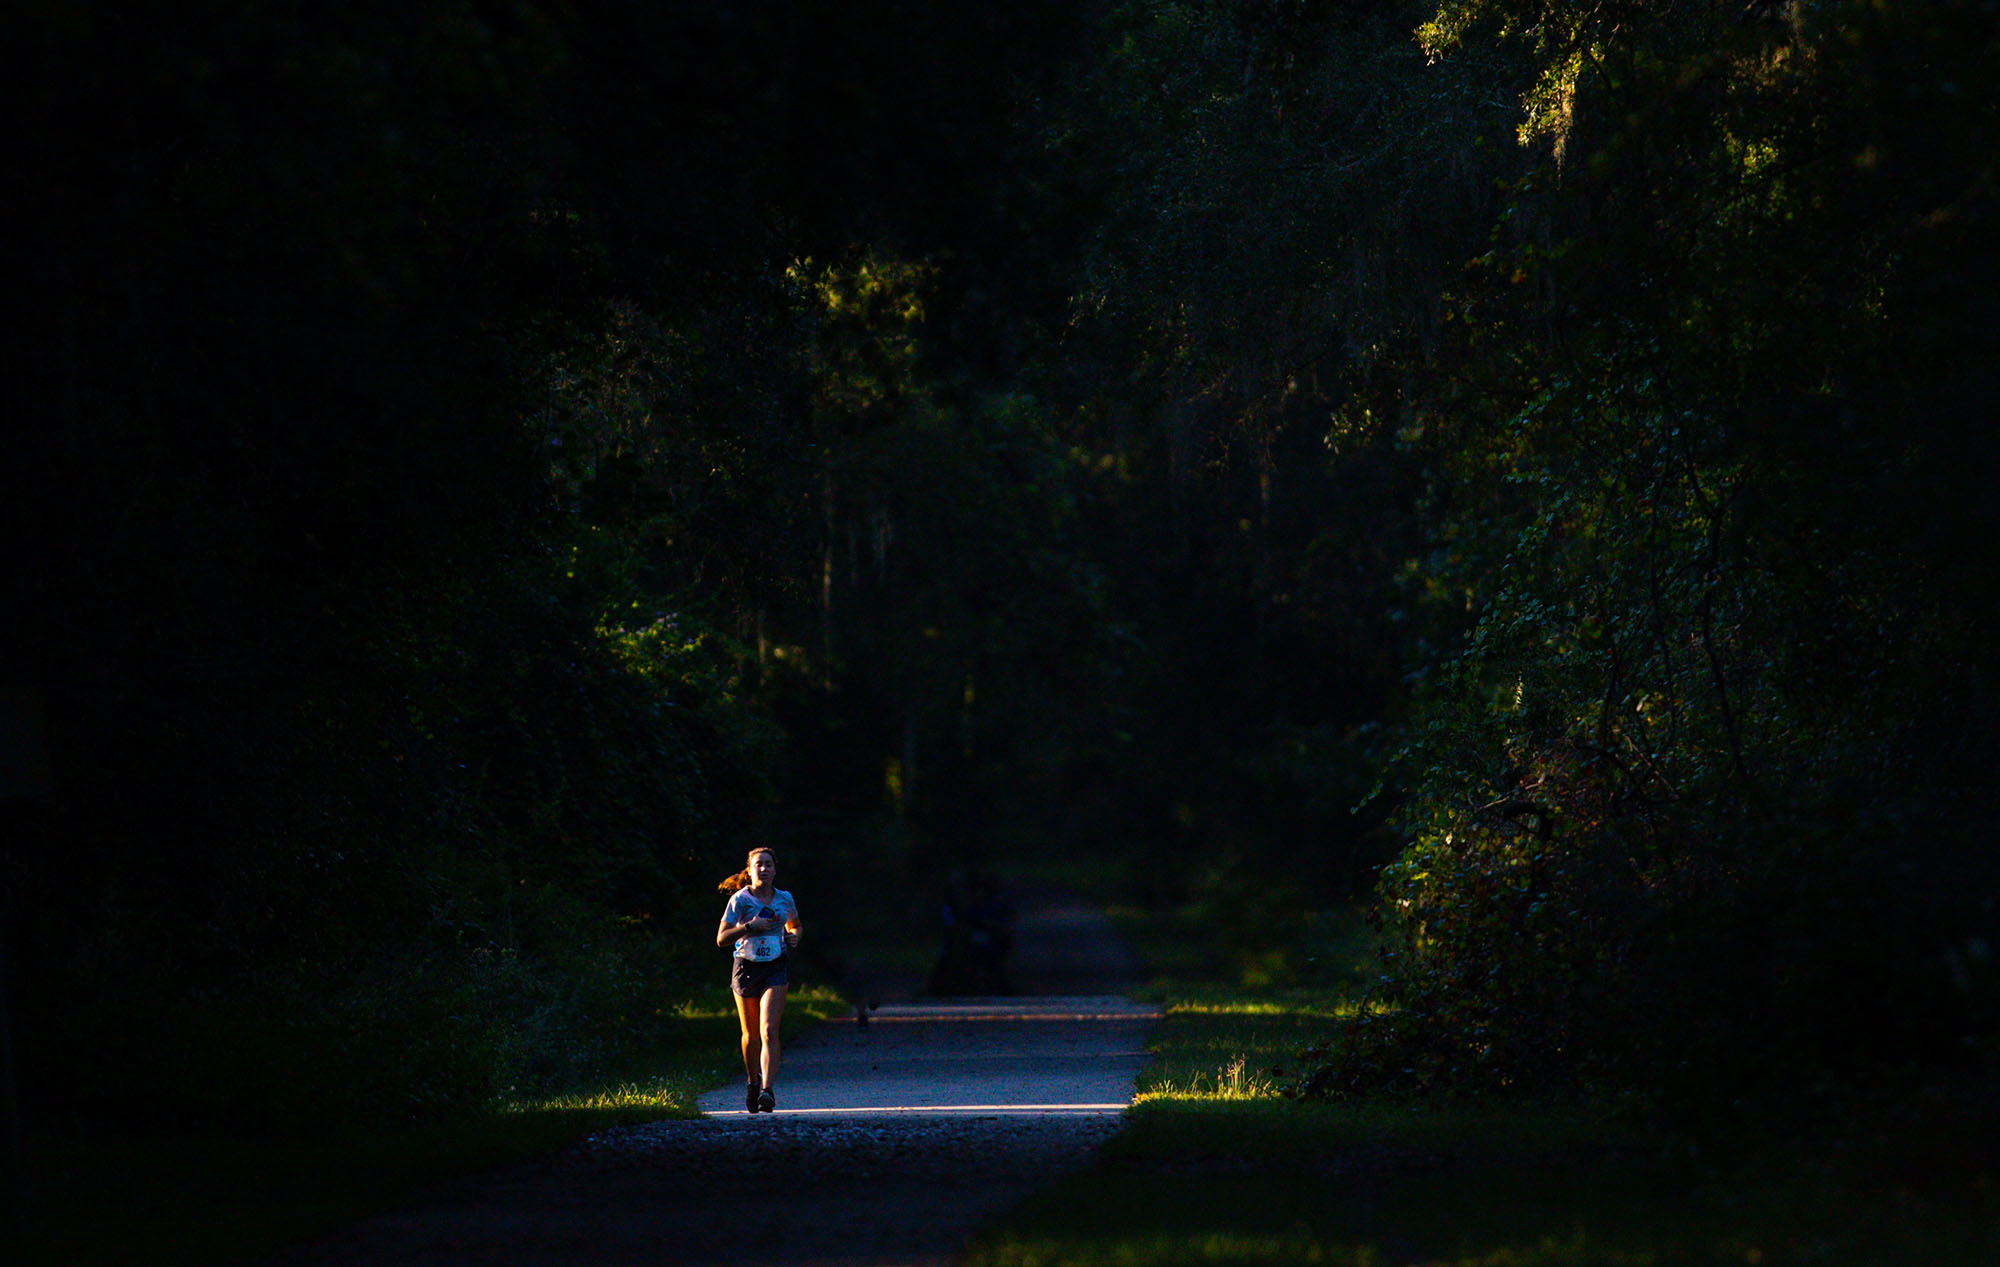 Florida Track Club Tom Walker Preview 10k and 5k Race on the Gainesville Hawthorne Trail on Saturday, Oct. 9, 2021 in Gainesville, Florida. (Photo by Matt Stamey)